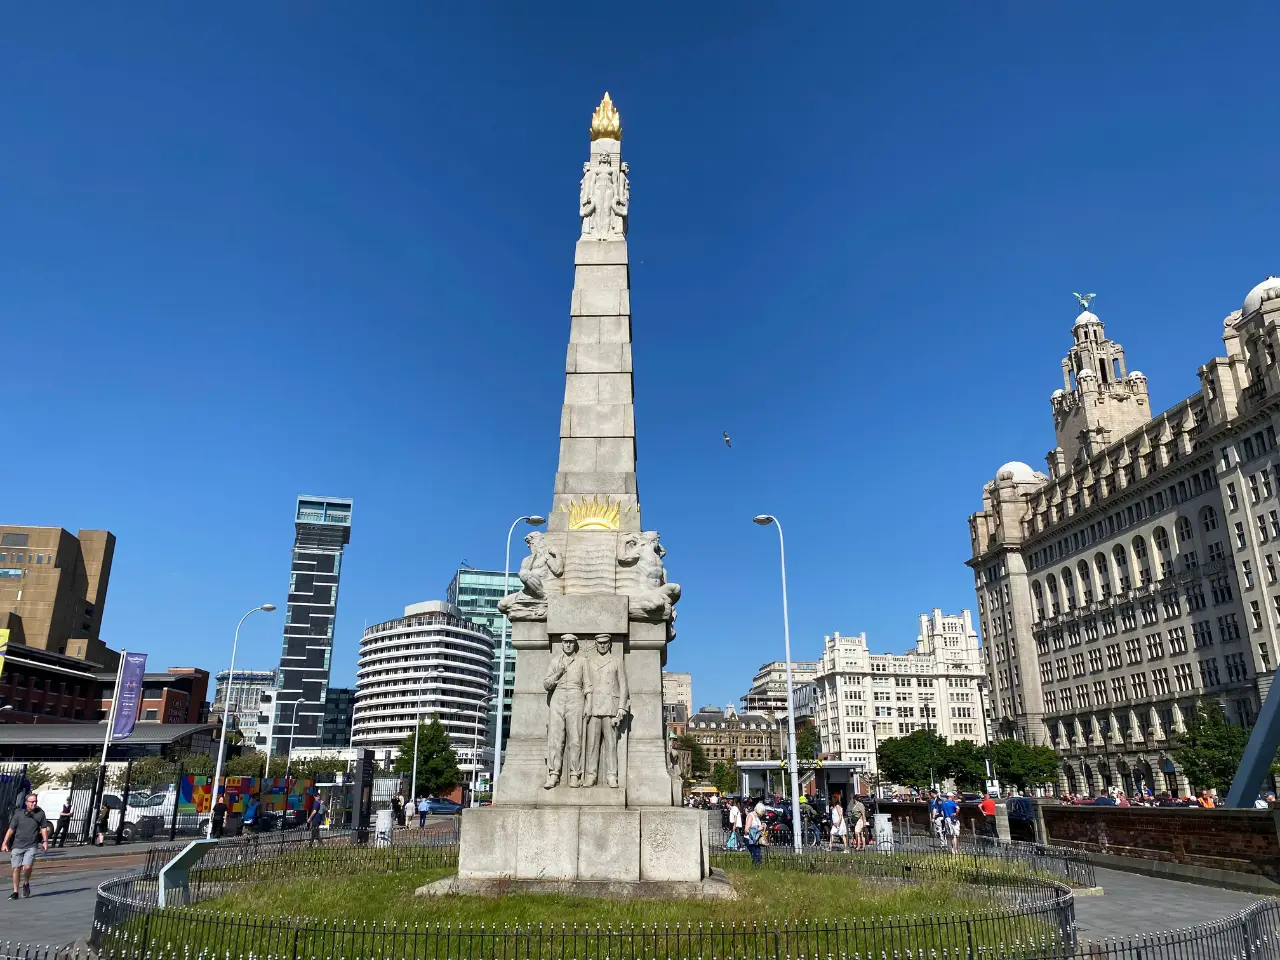 Titanic Memorial, one of the most famous Liverpool monuments